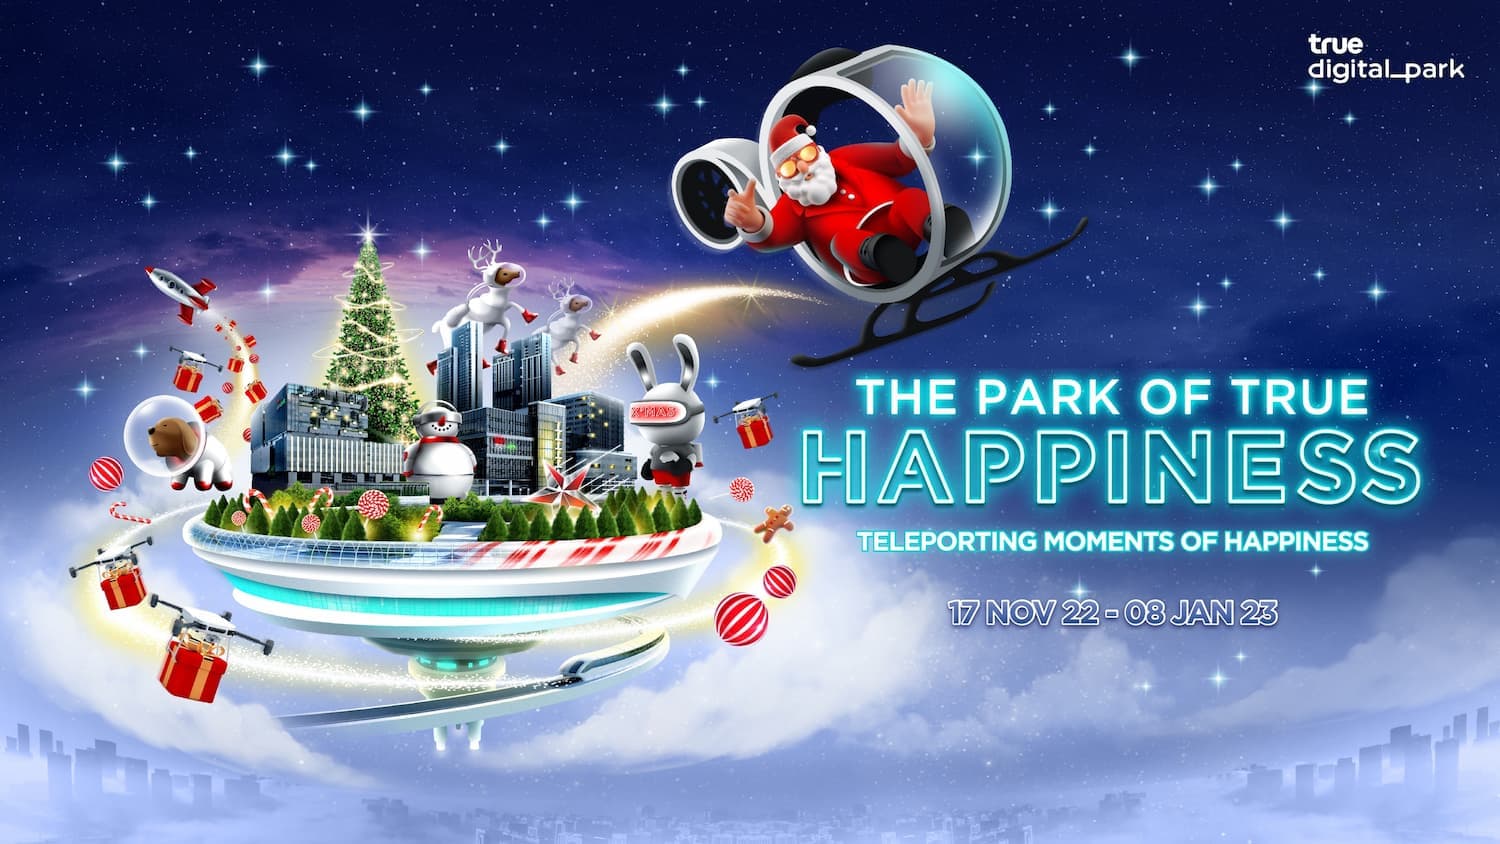 True Digital Park Launches Grand Year-end ‘The Park of True Happiness Festival’